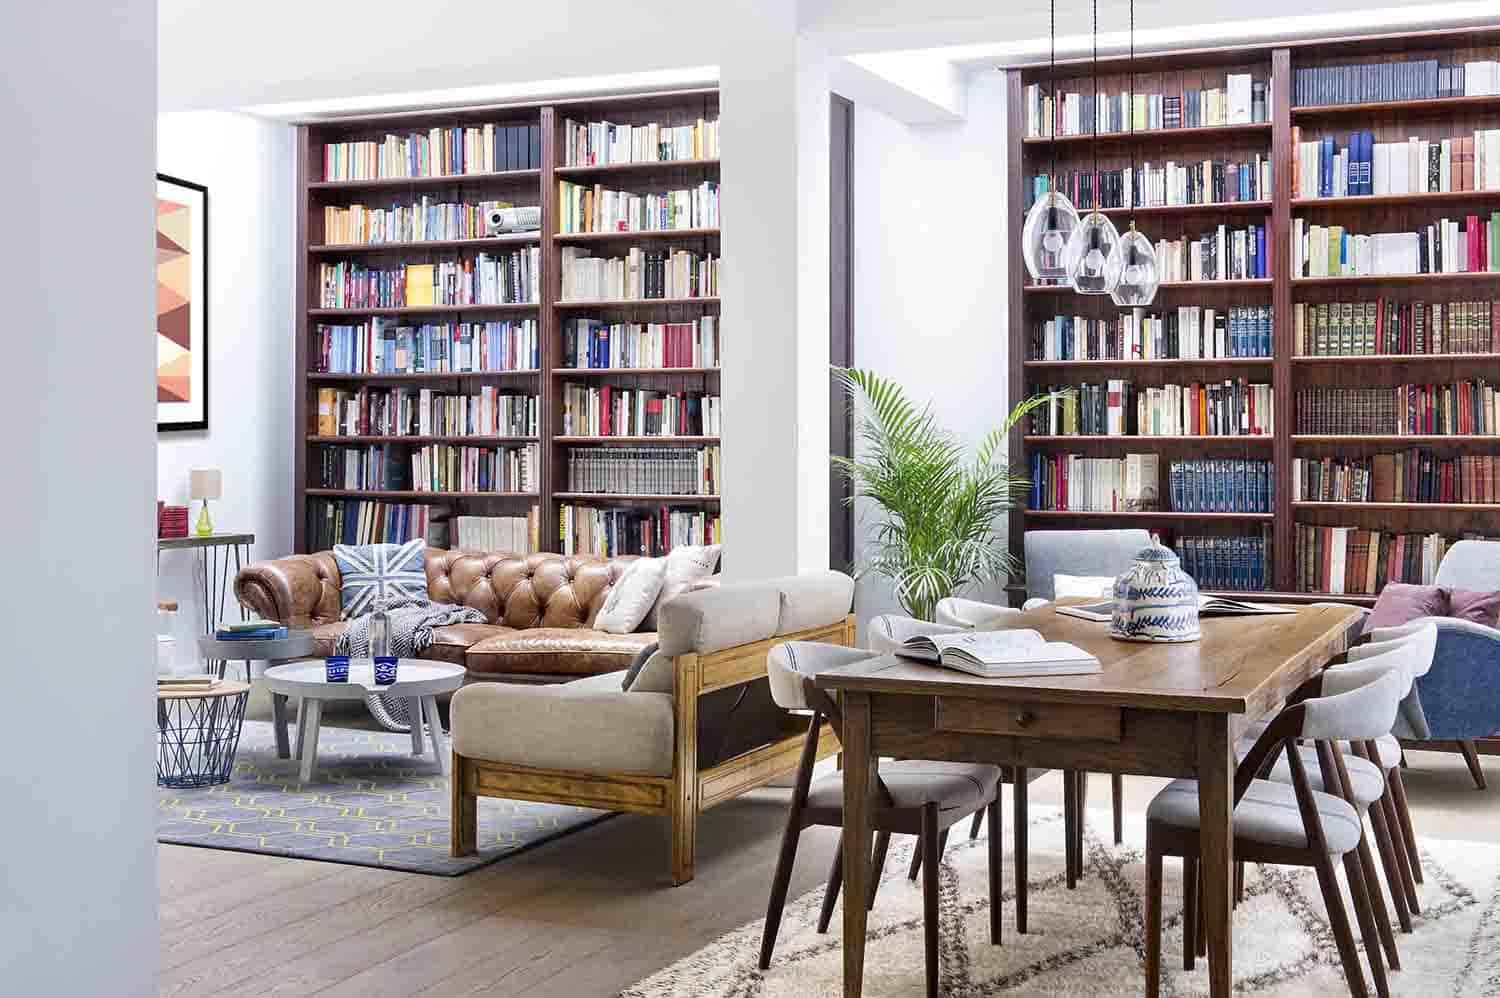 Inspiring dwelling in Madrid displaying a cool home library